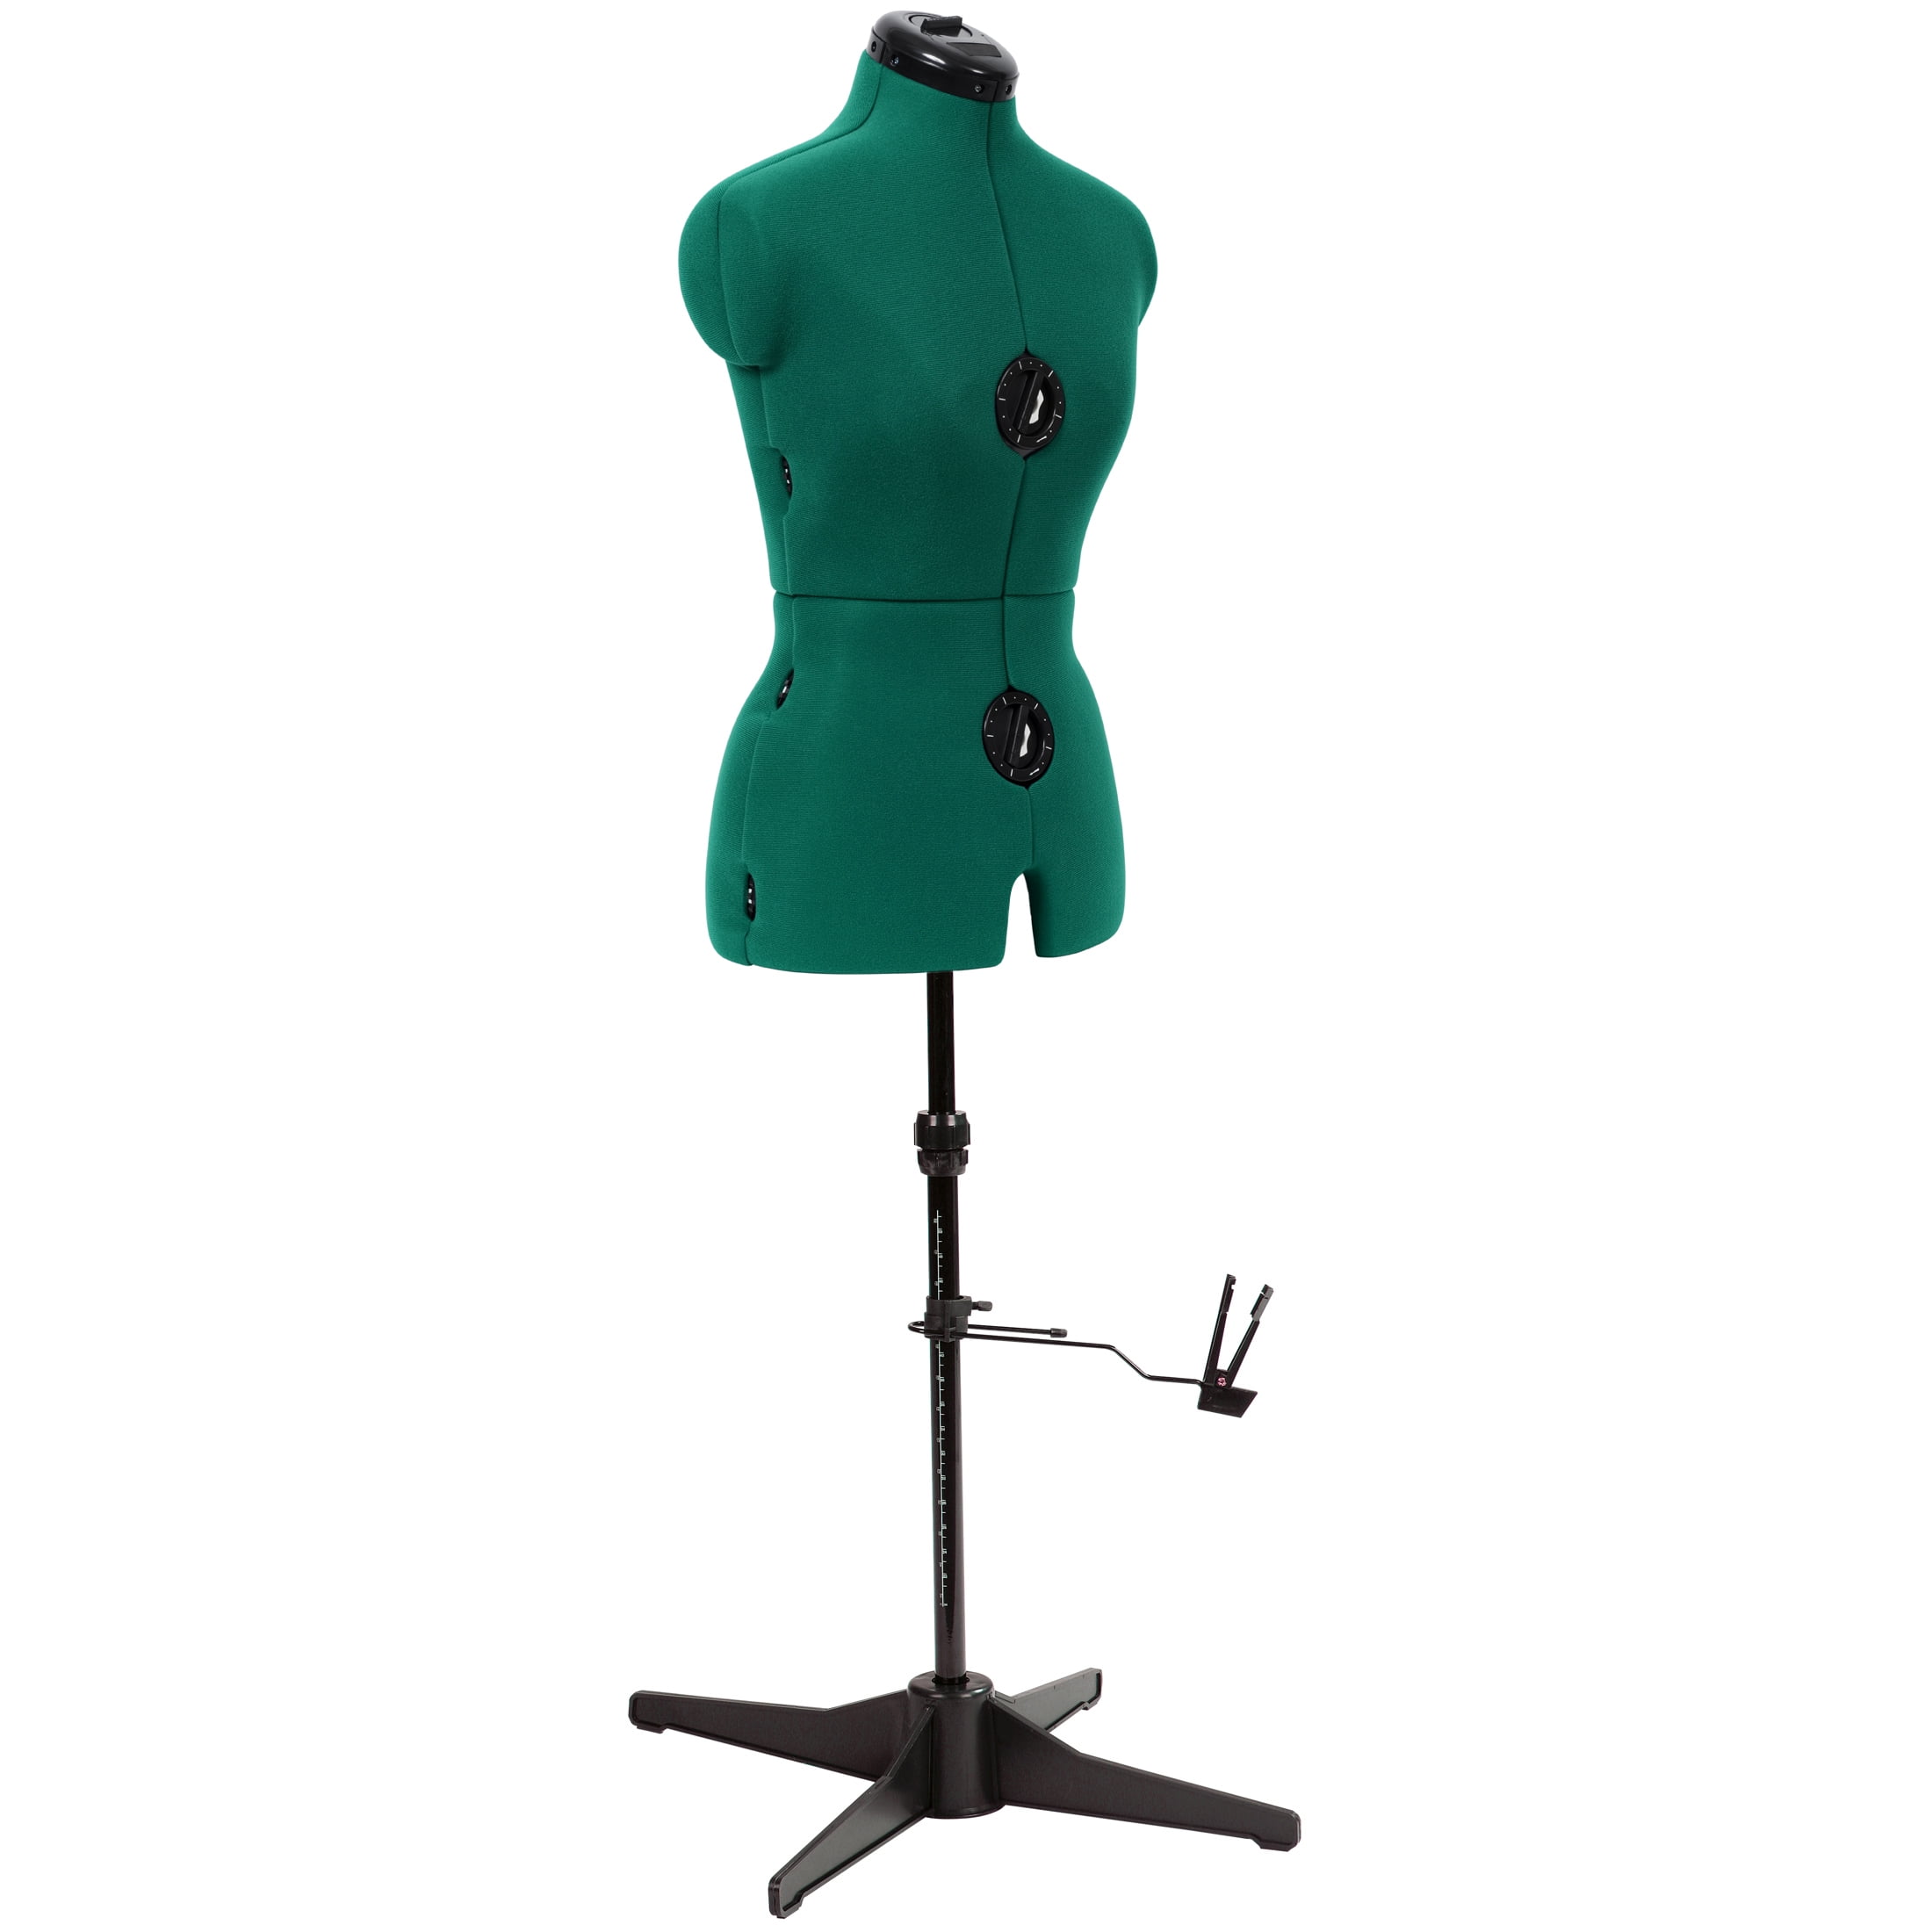 Female Adjustable Dritz Sew You Dress Form Mannequin Size Small for sale online 